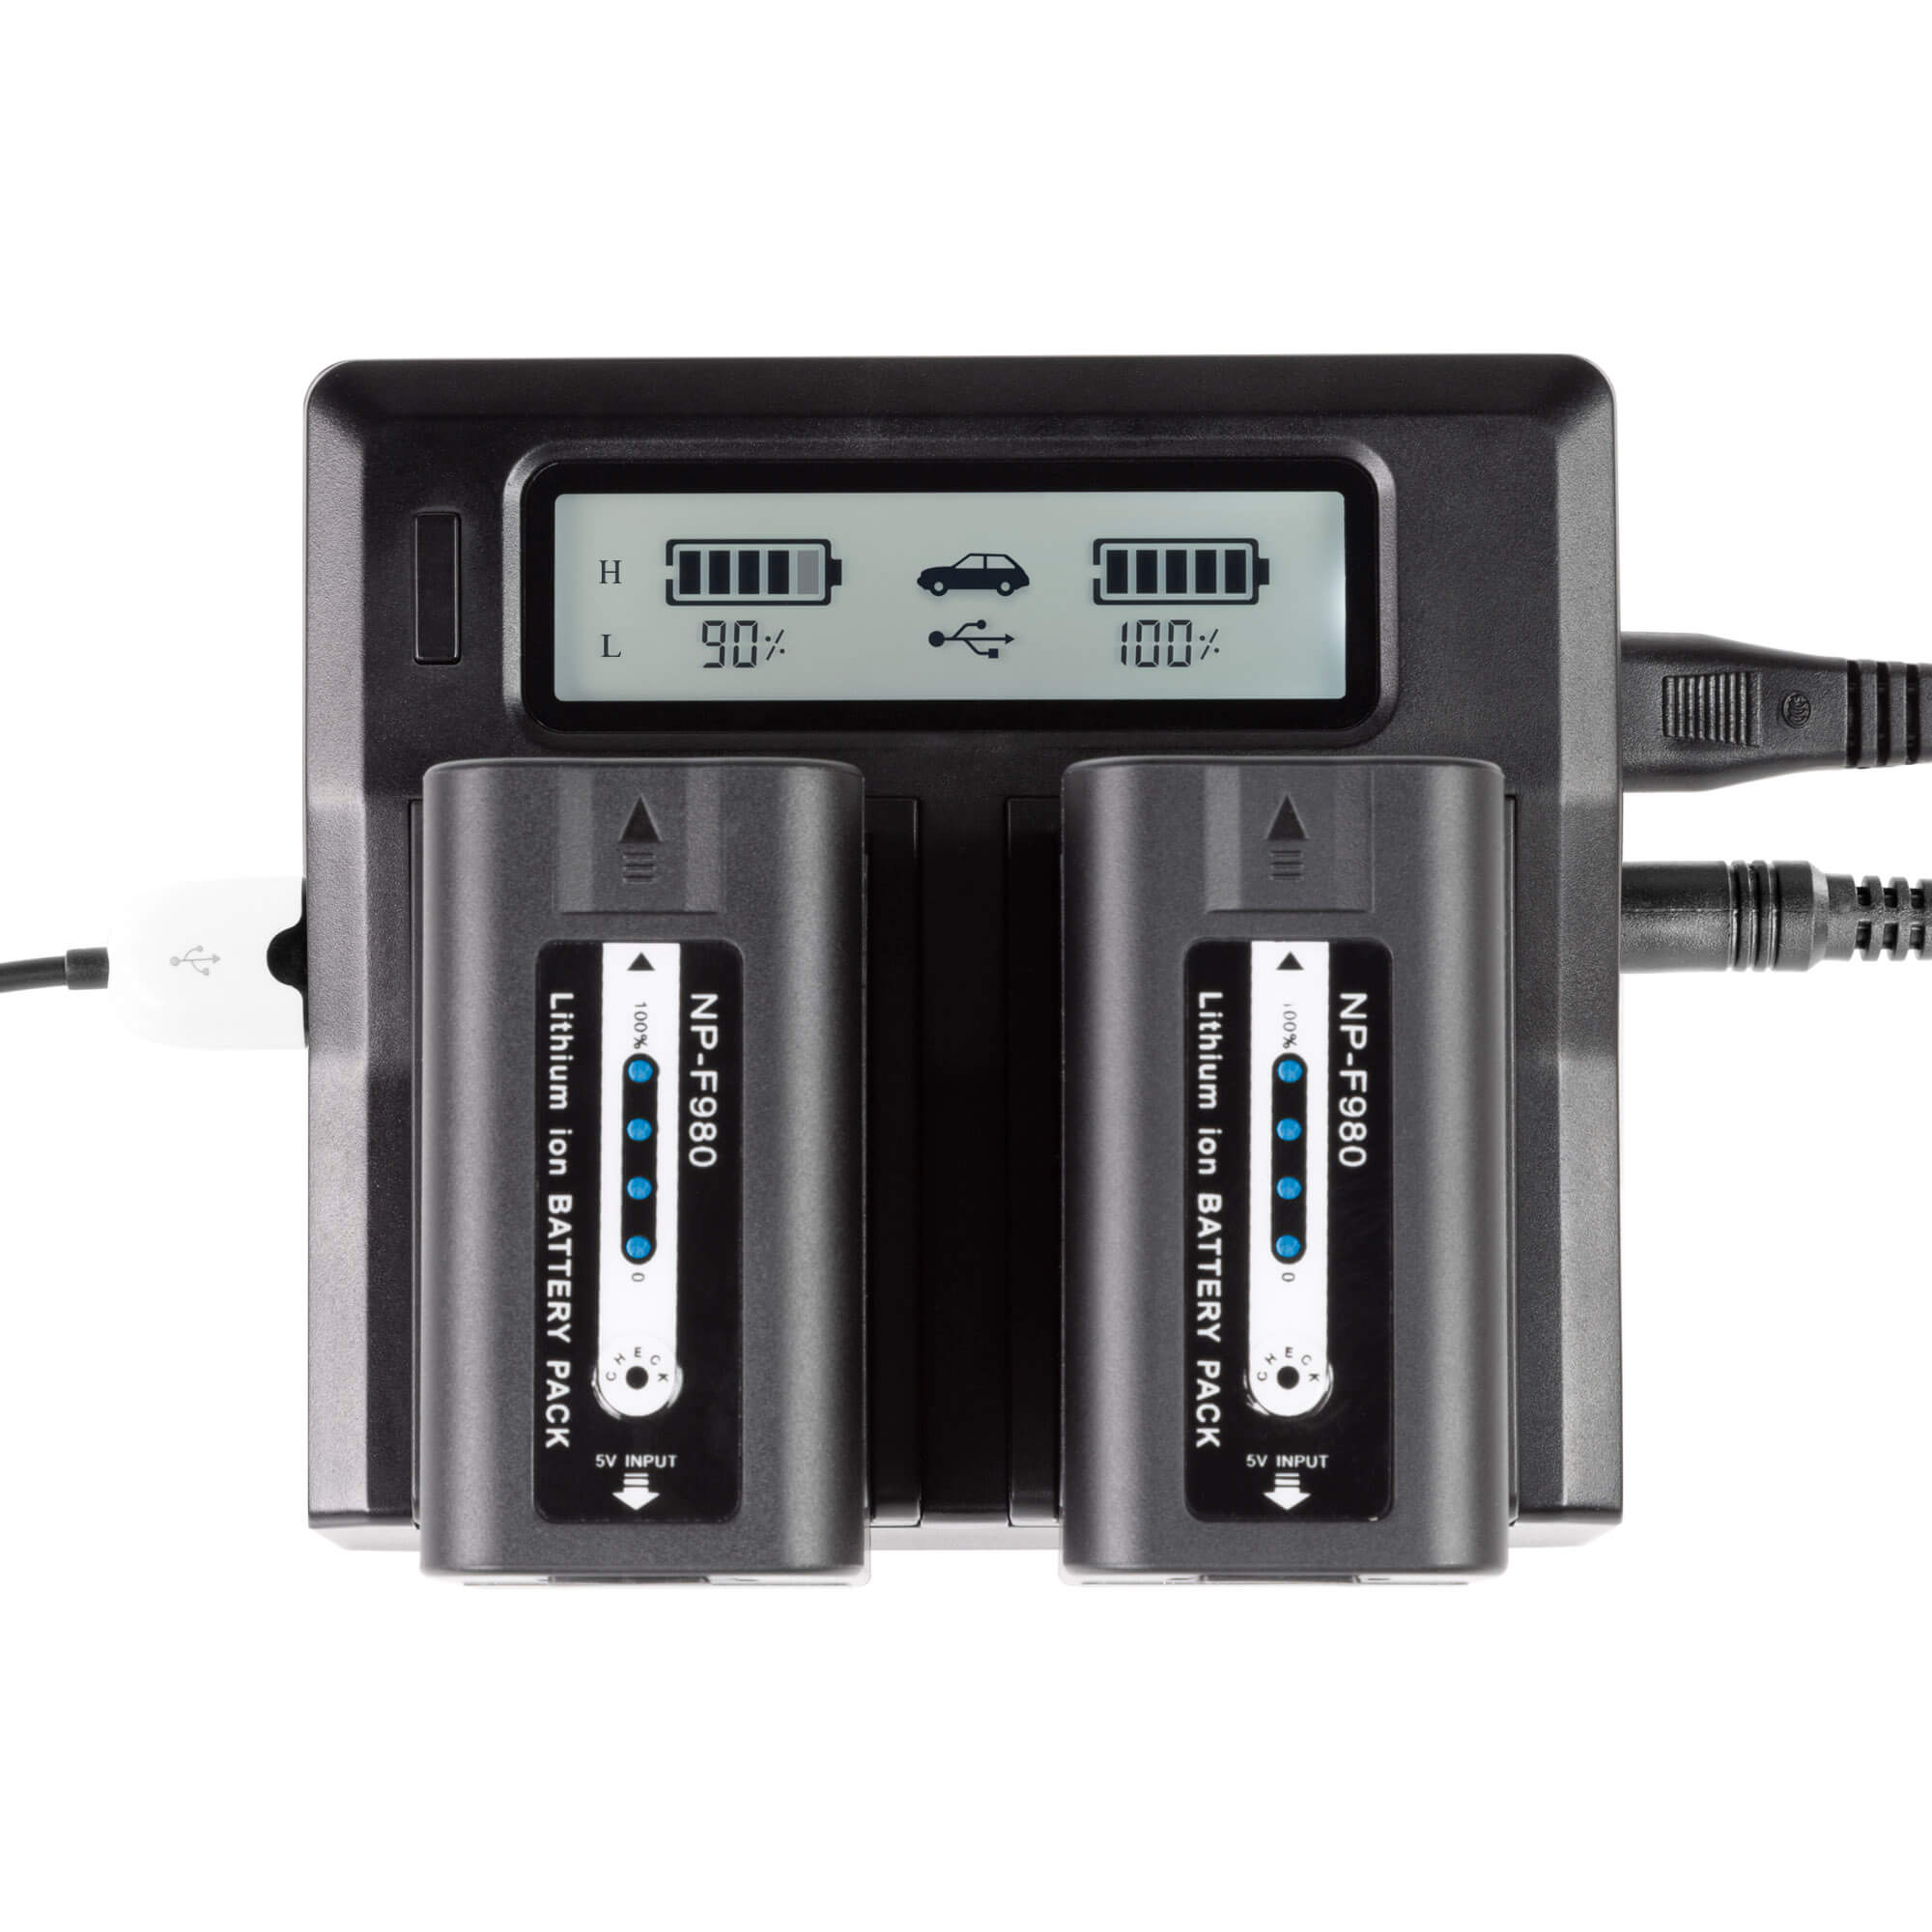 SHAPE NP-F980 Batteries with Dual LCD Charger for Sony - SHAPE wlb